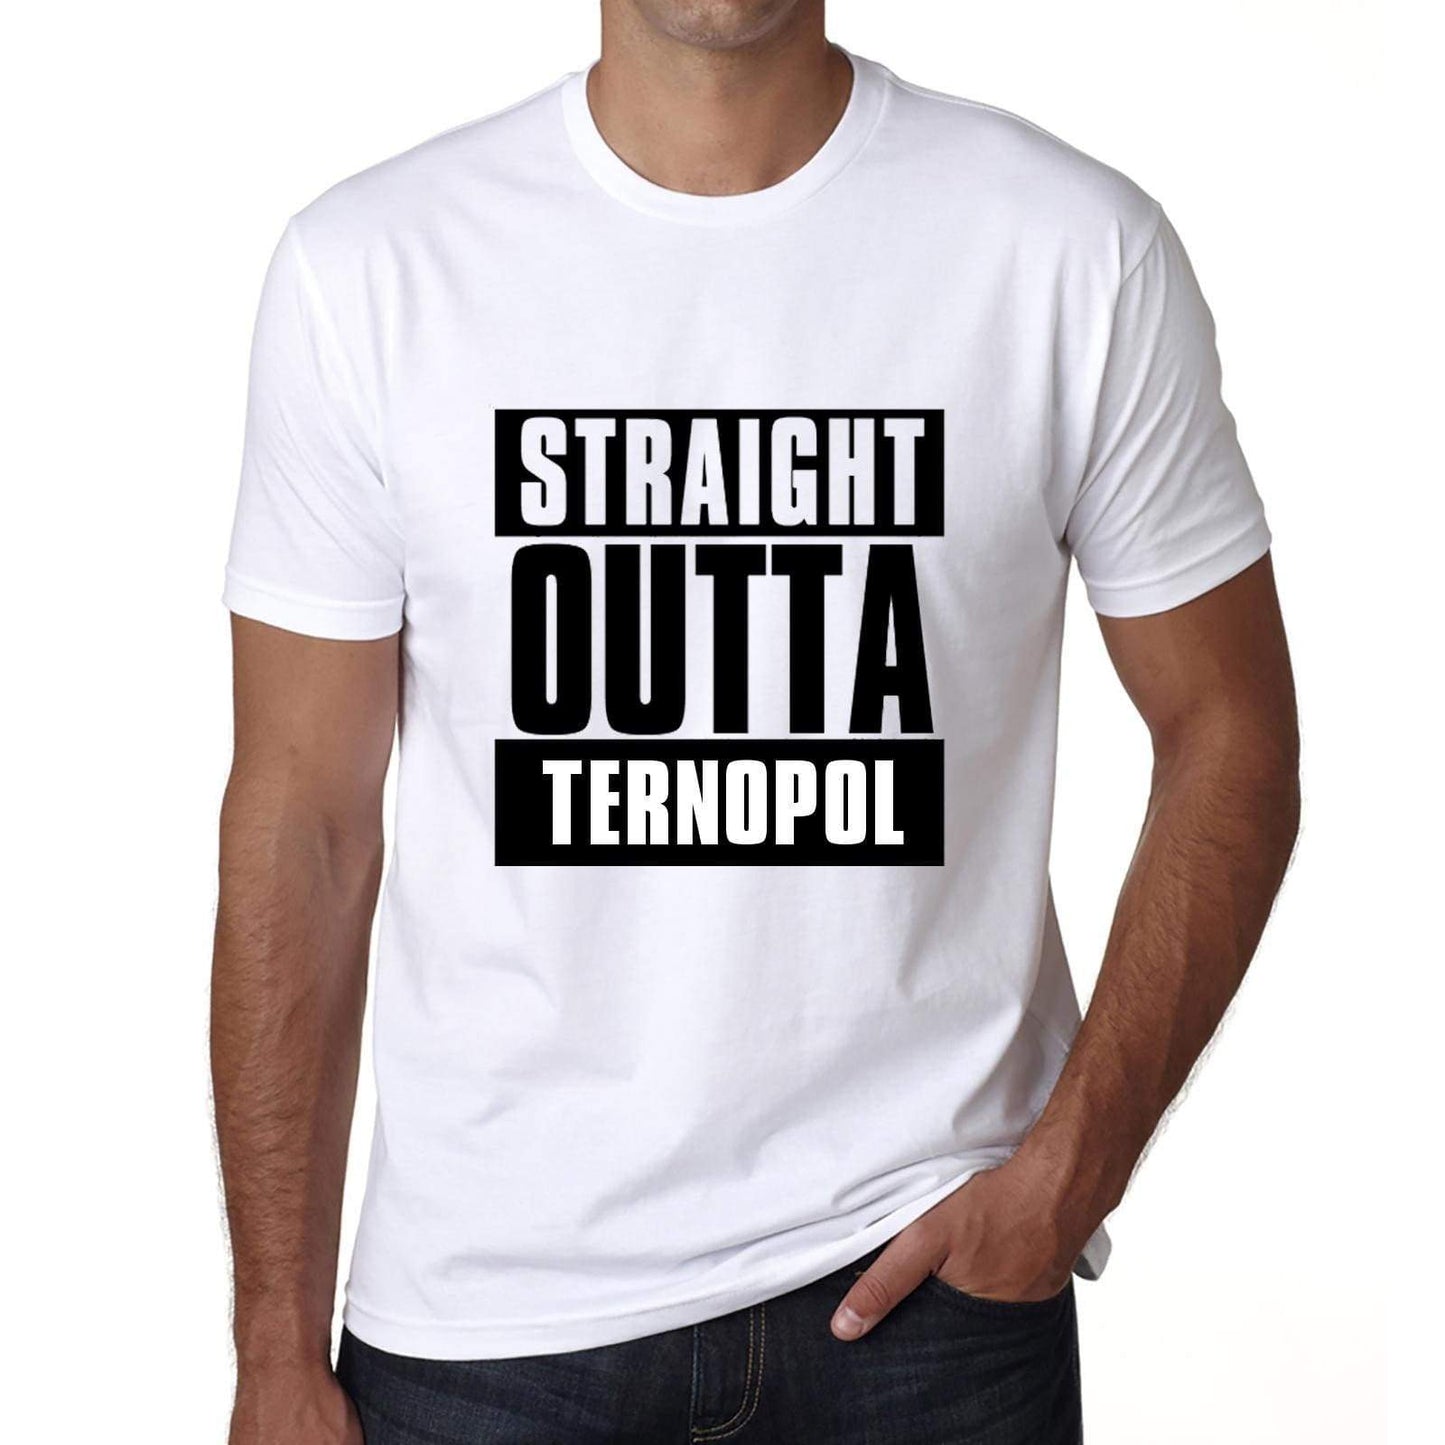 Straight Outta Ternopol Mens Short Sleeve Round Neck T-Shirt 00027 - White / S - Casual